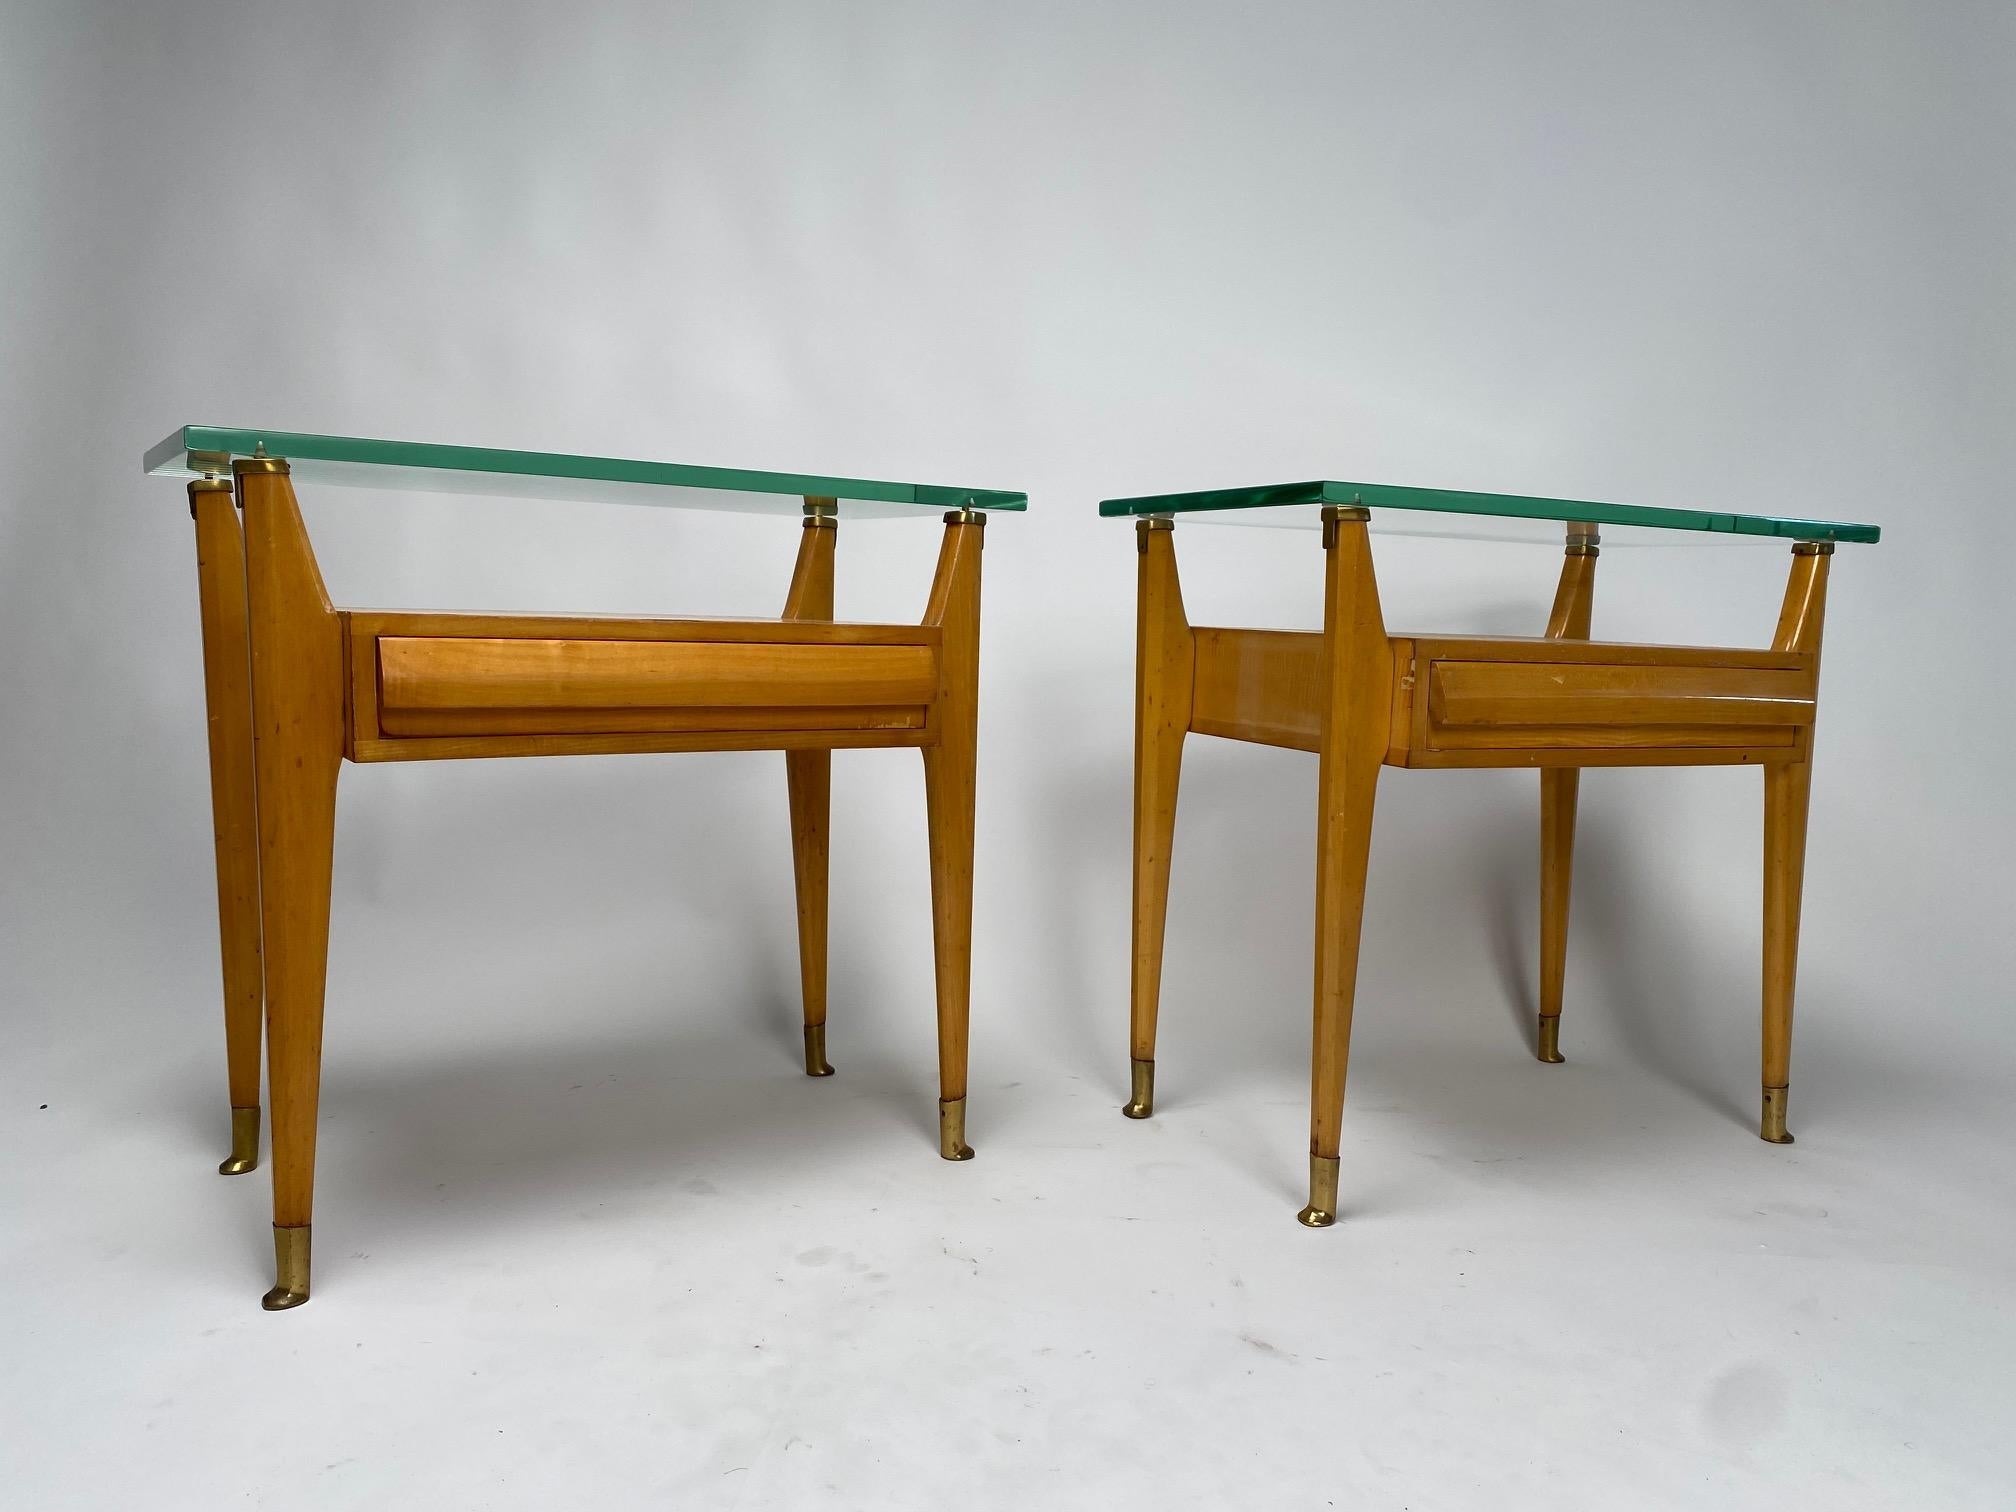 Refined pair of Italian bedside tables from the 1950s in wood, brass and thick glass on the top.

Pair of nightstands which are characterized by a thick glass plate on the top, probably made by the same glassworks that produced the glass for